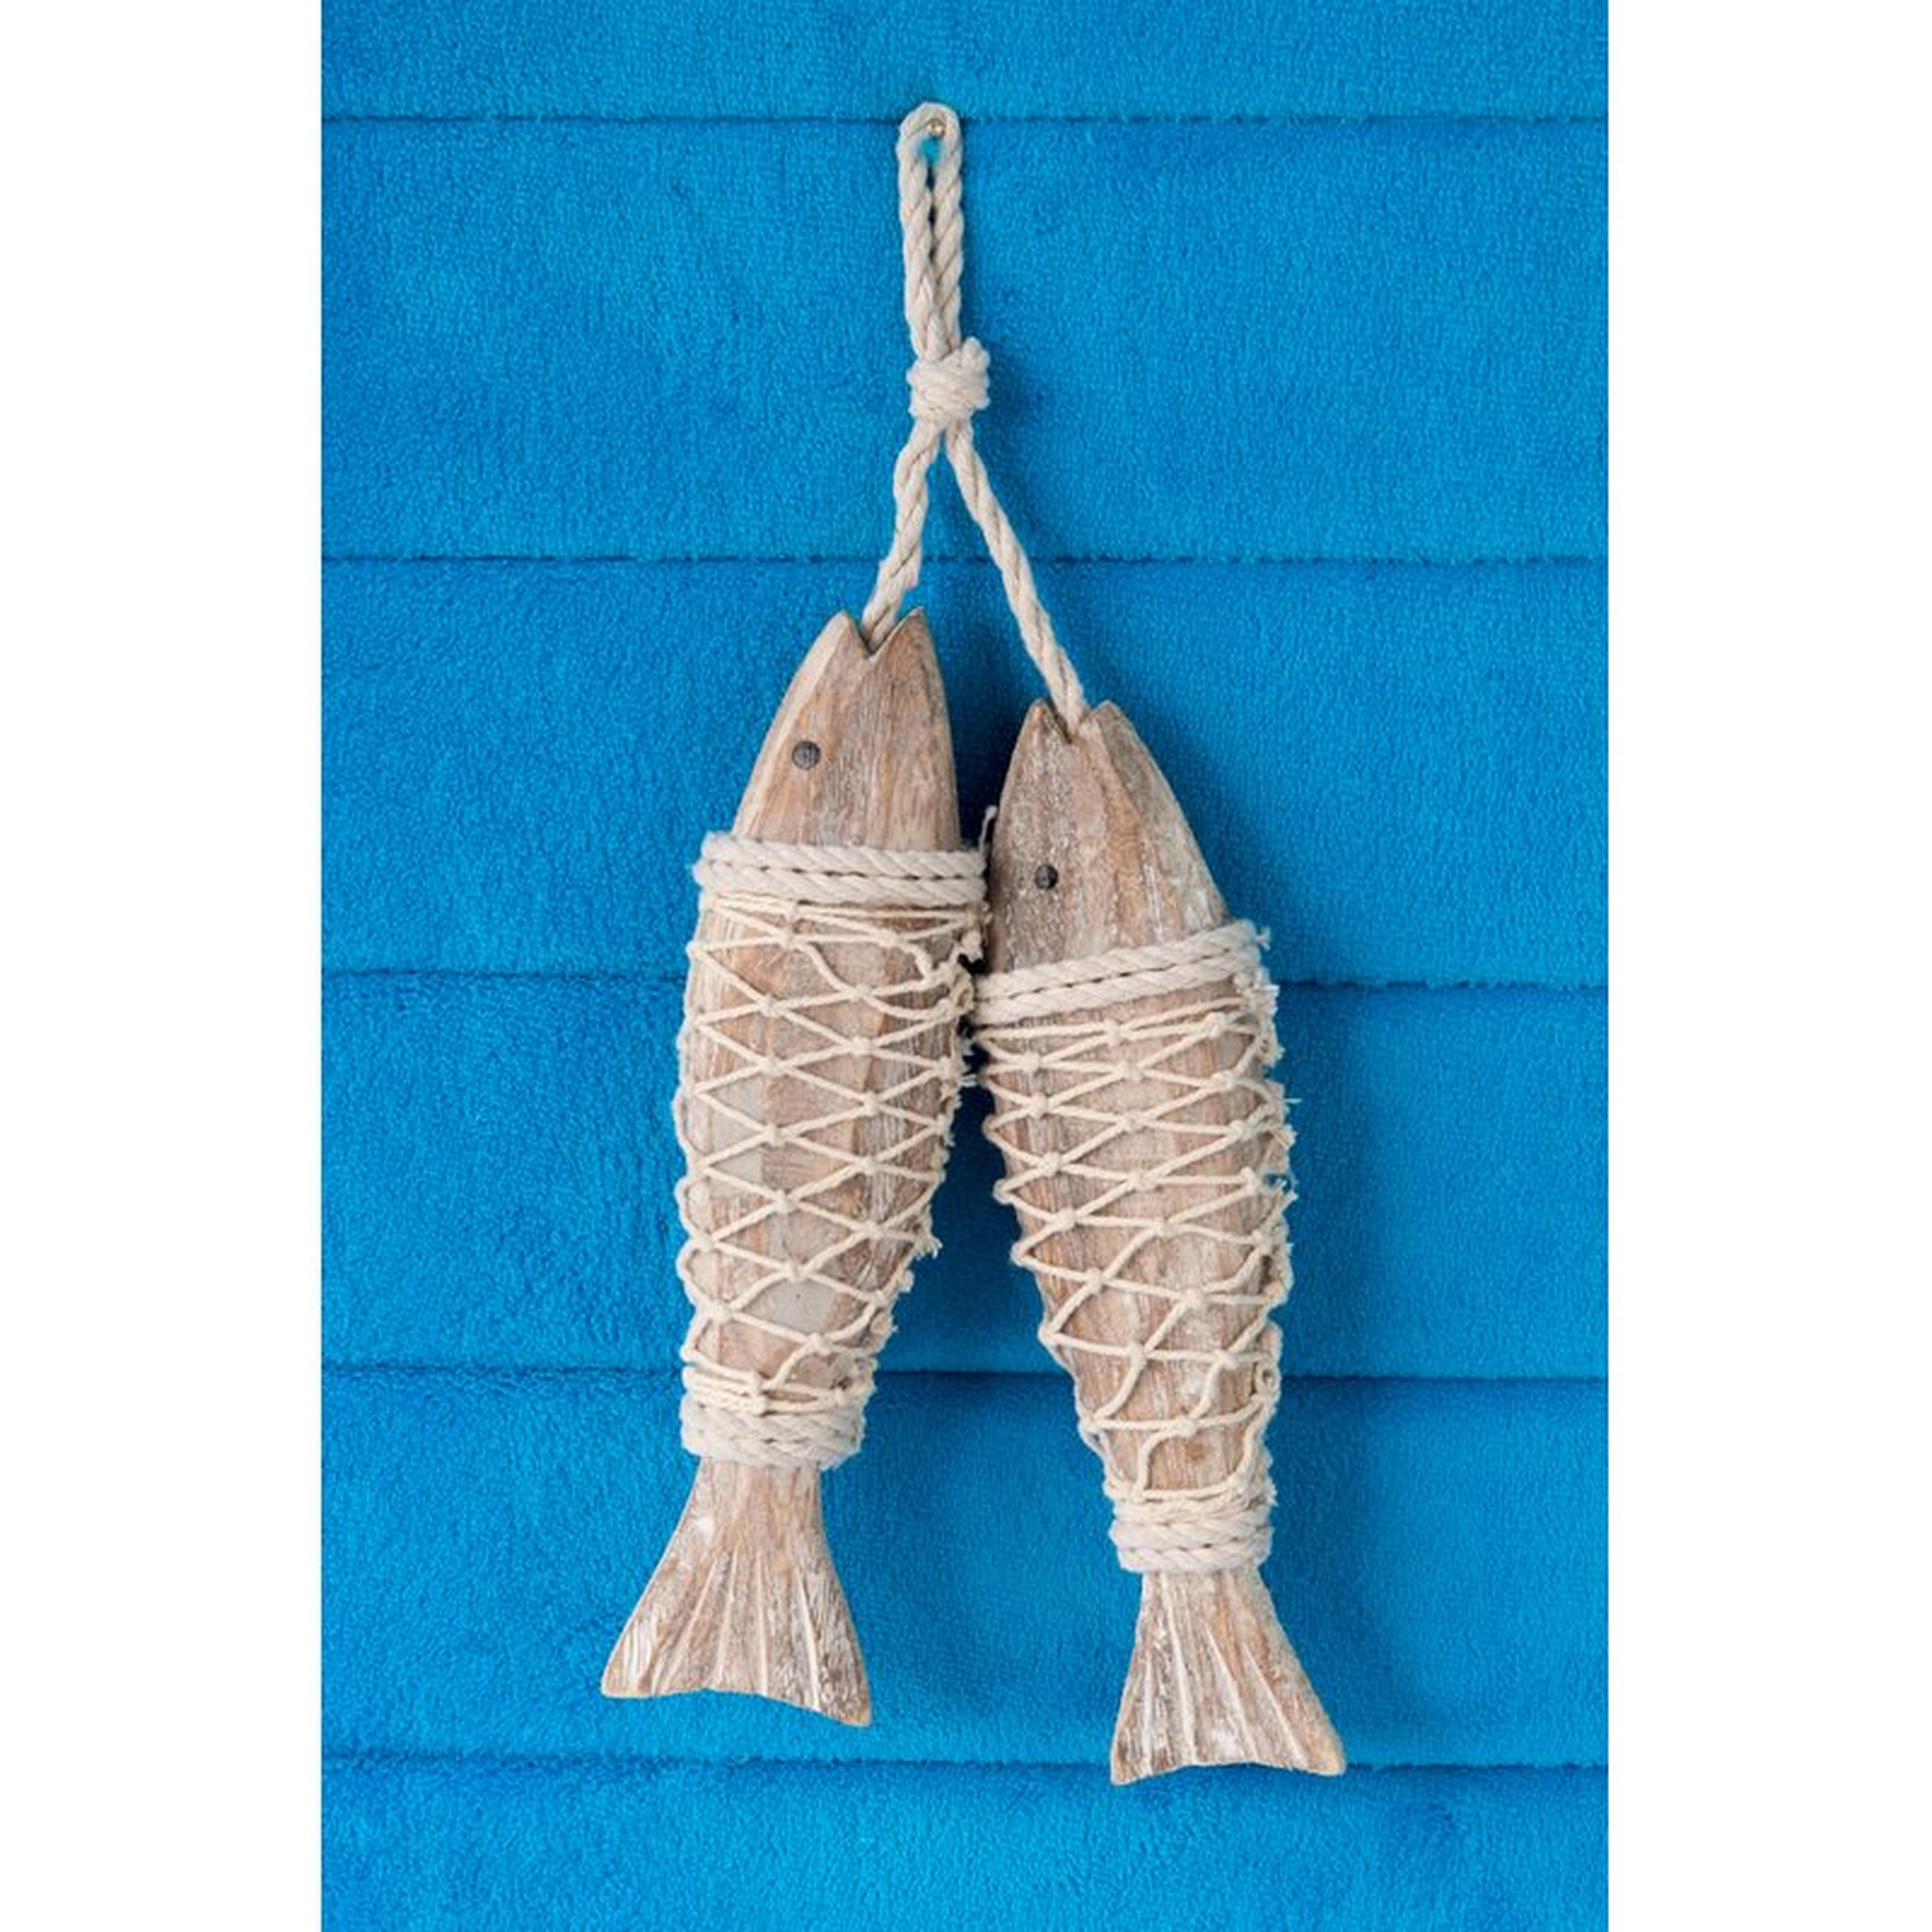 Handcrafted Hanging Fish in Net Wall Décor - Wayfair